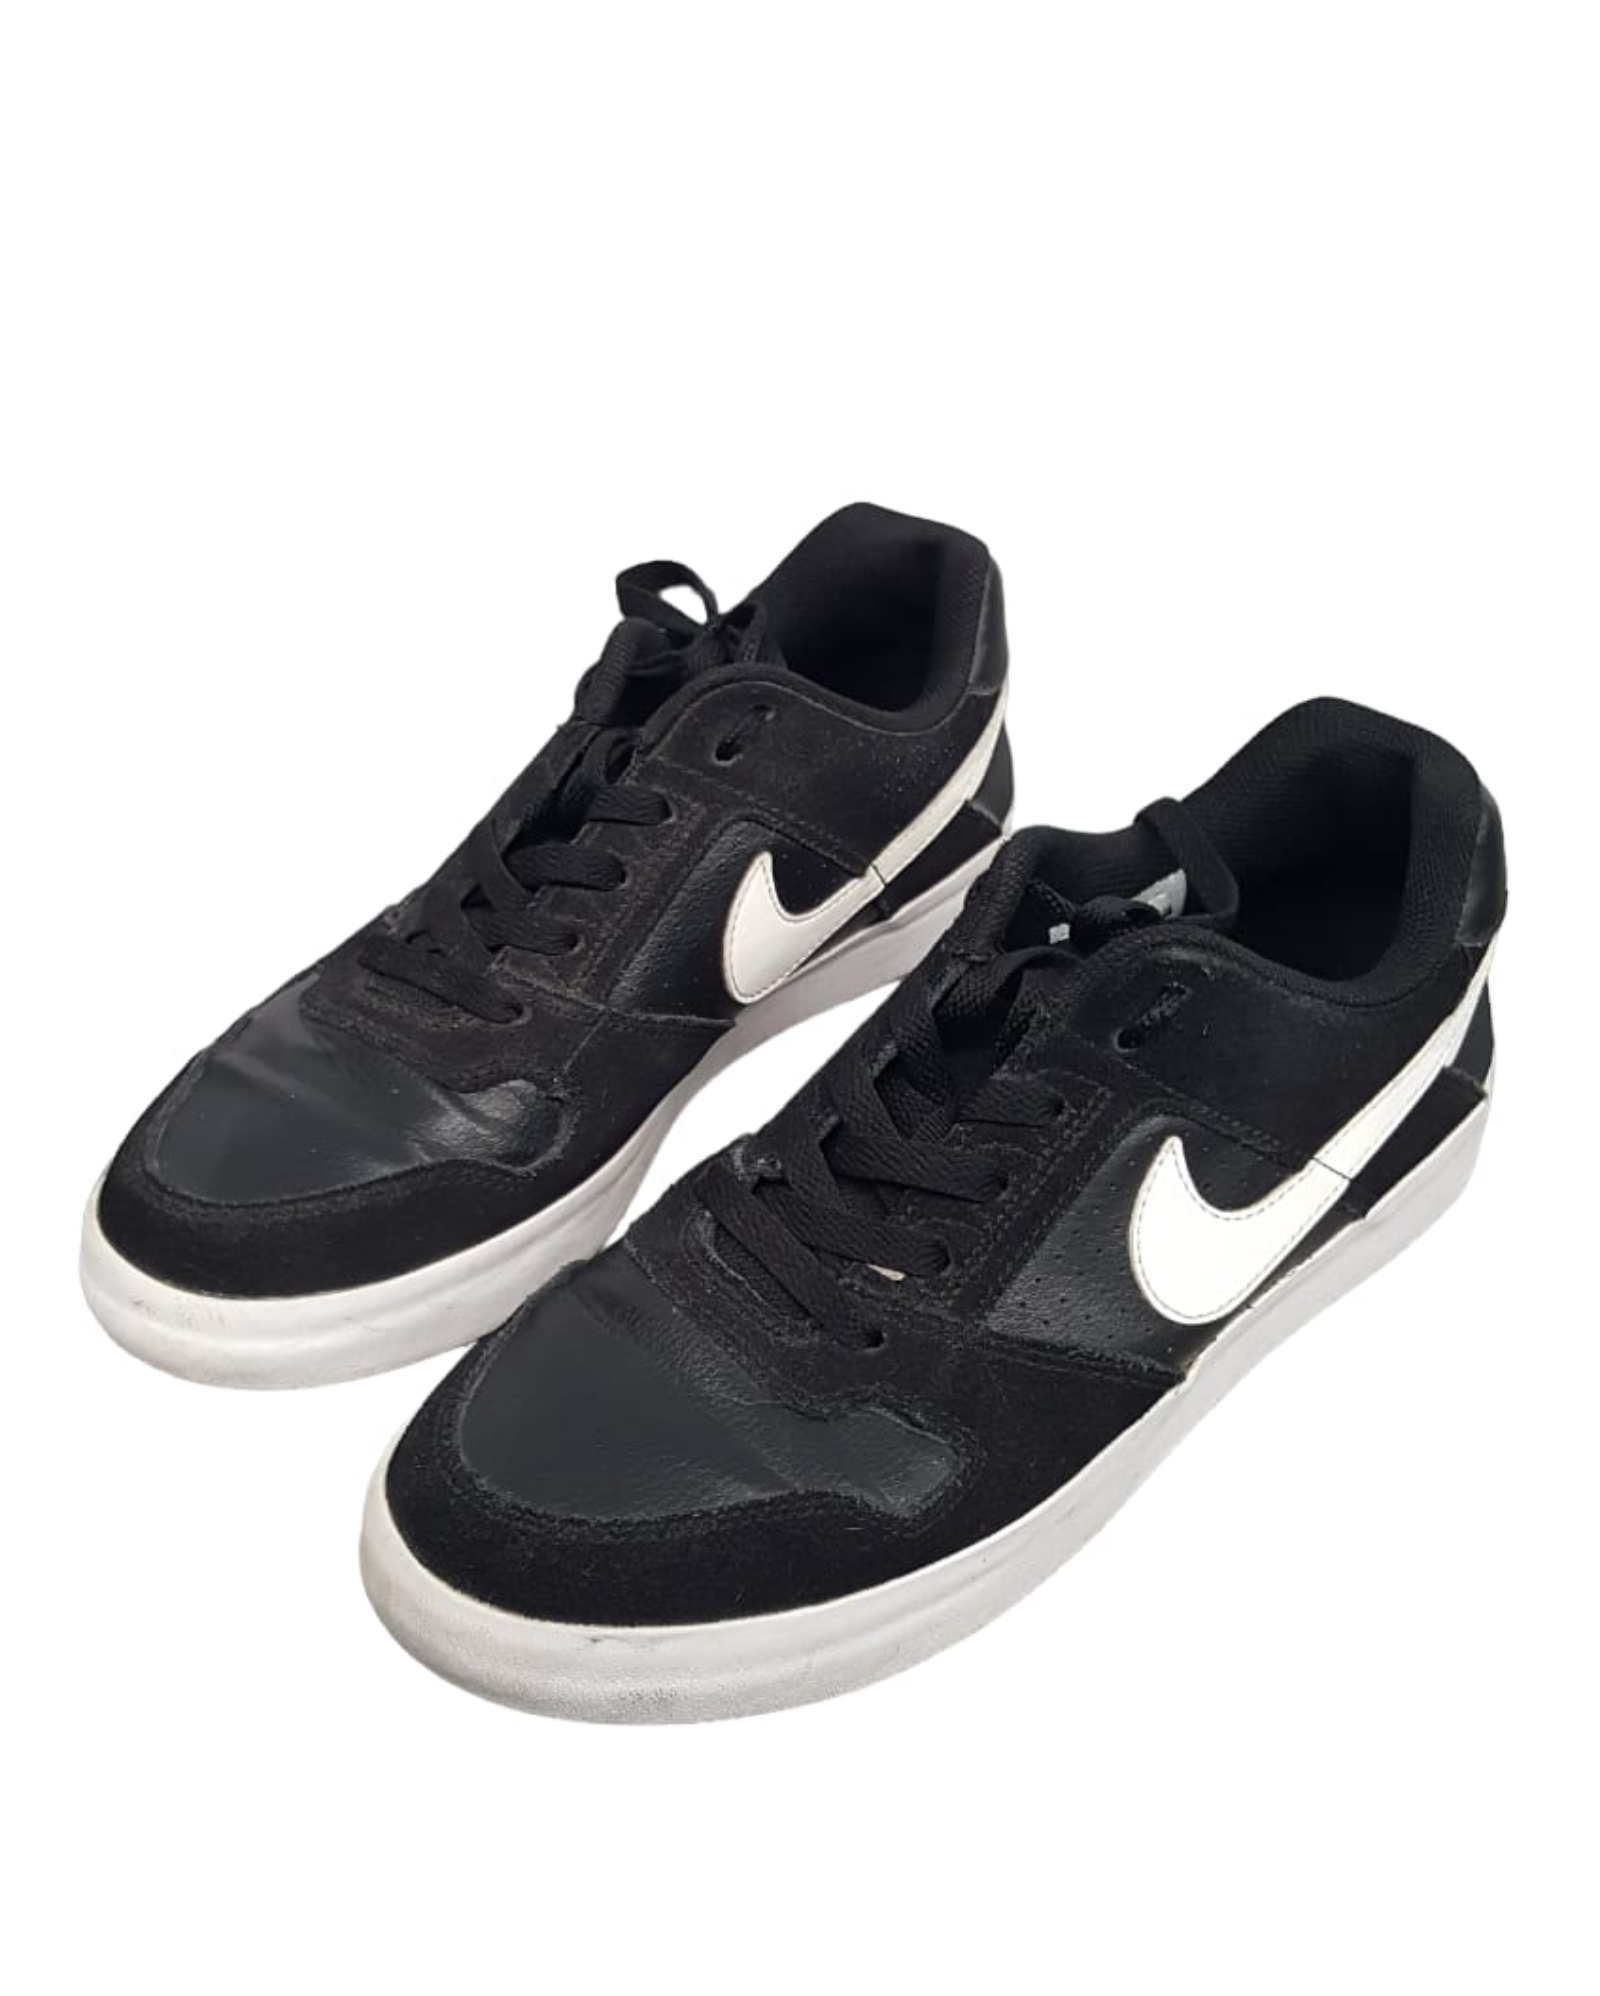 Zapatos Casuales Nike